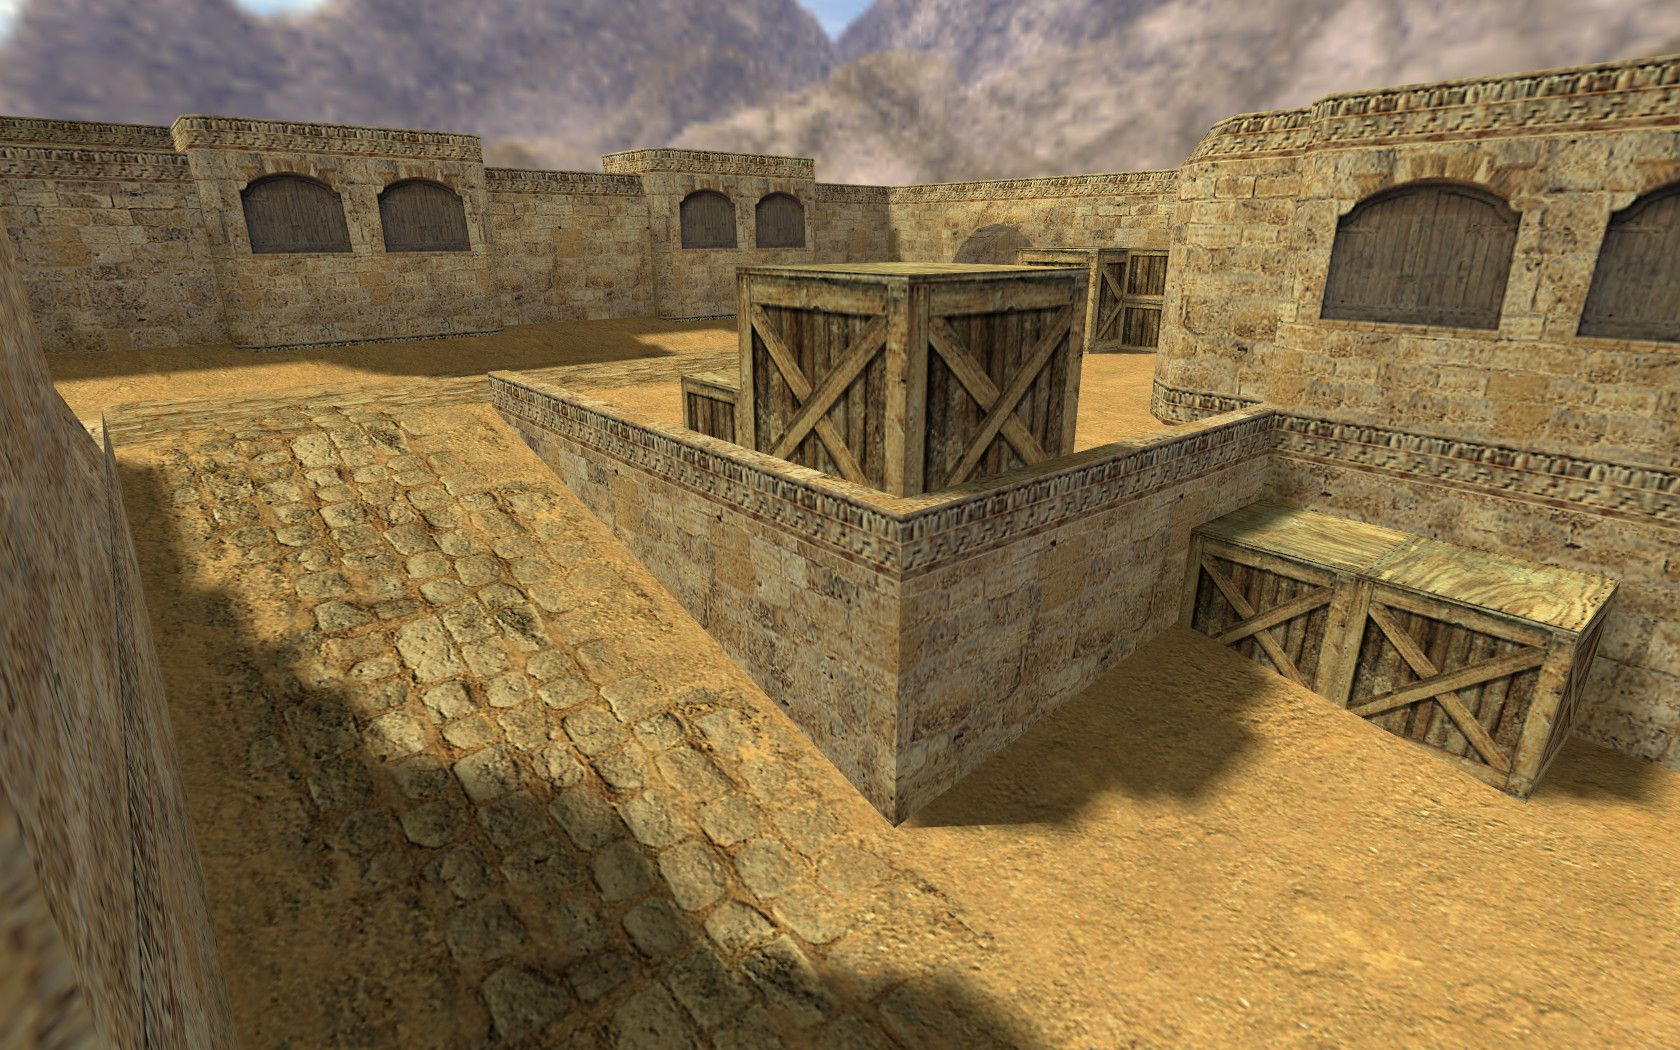 This is a view from the original CS1.6 map.